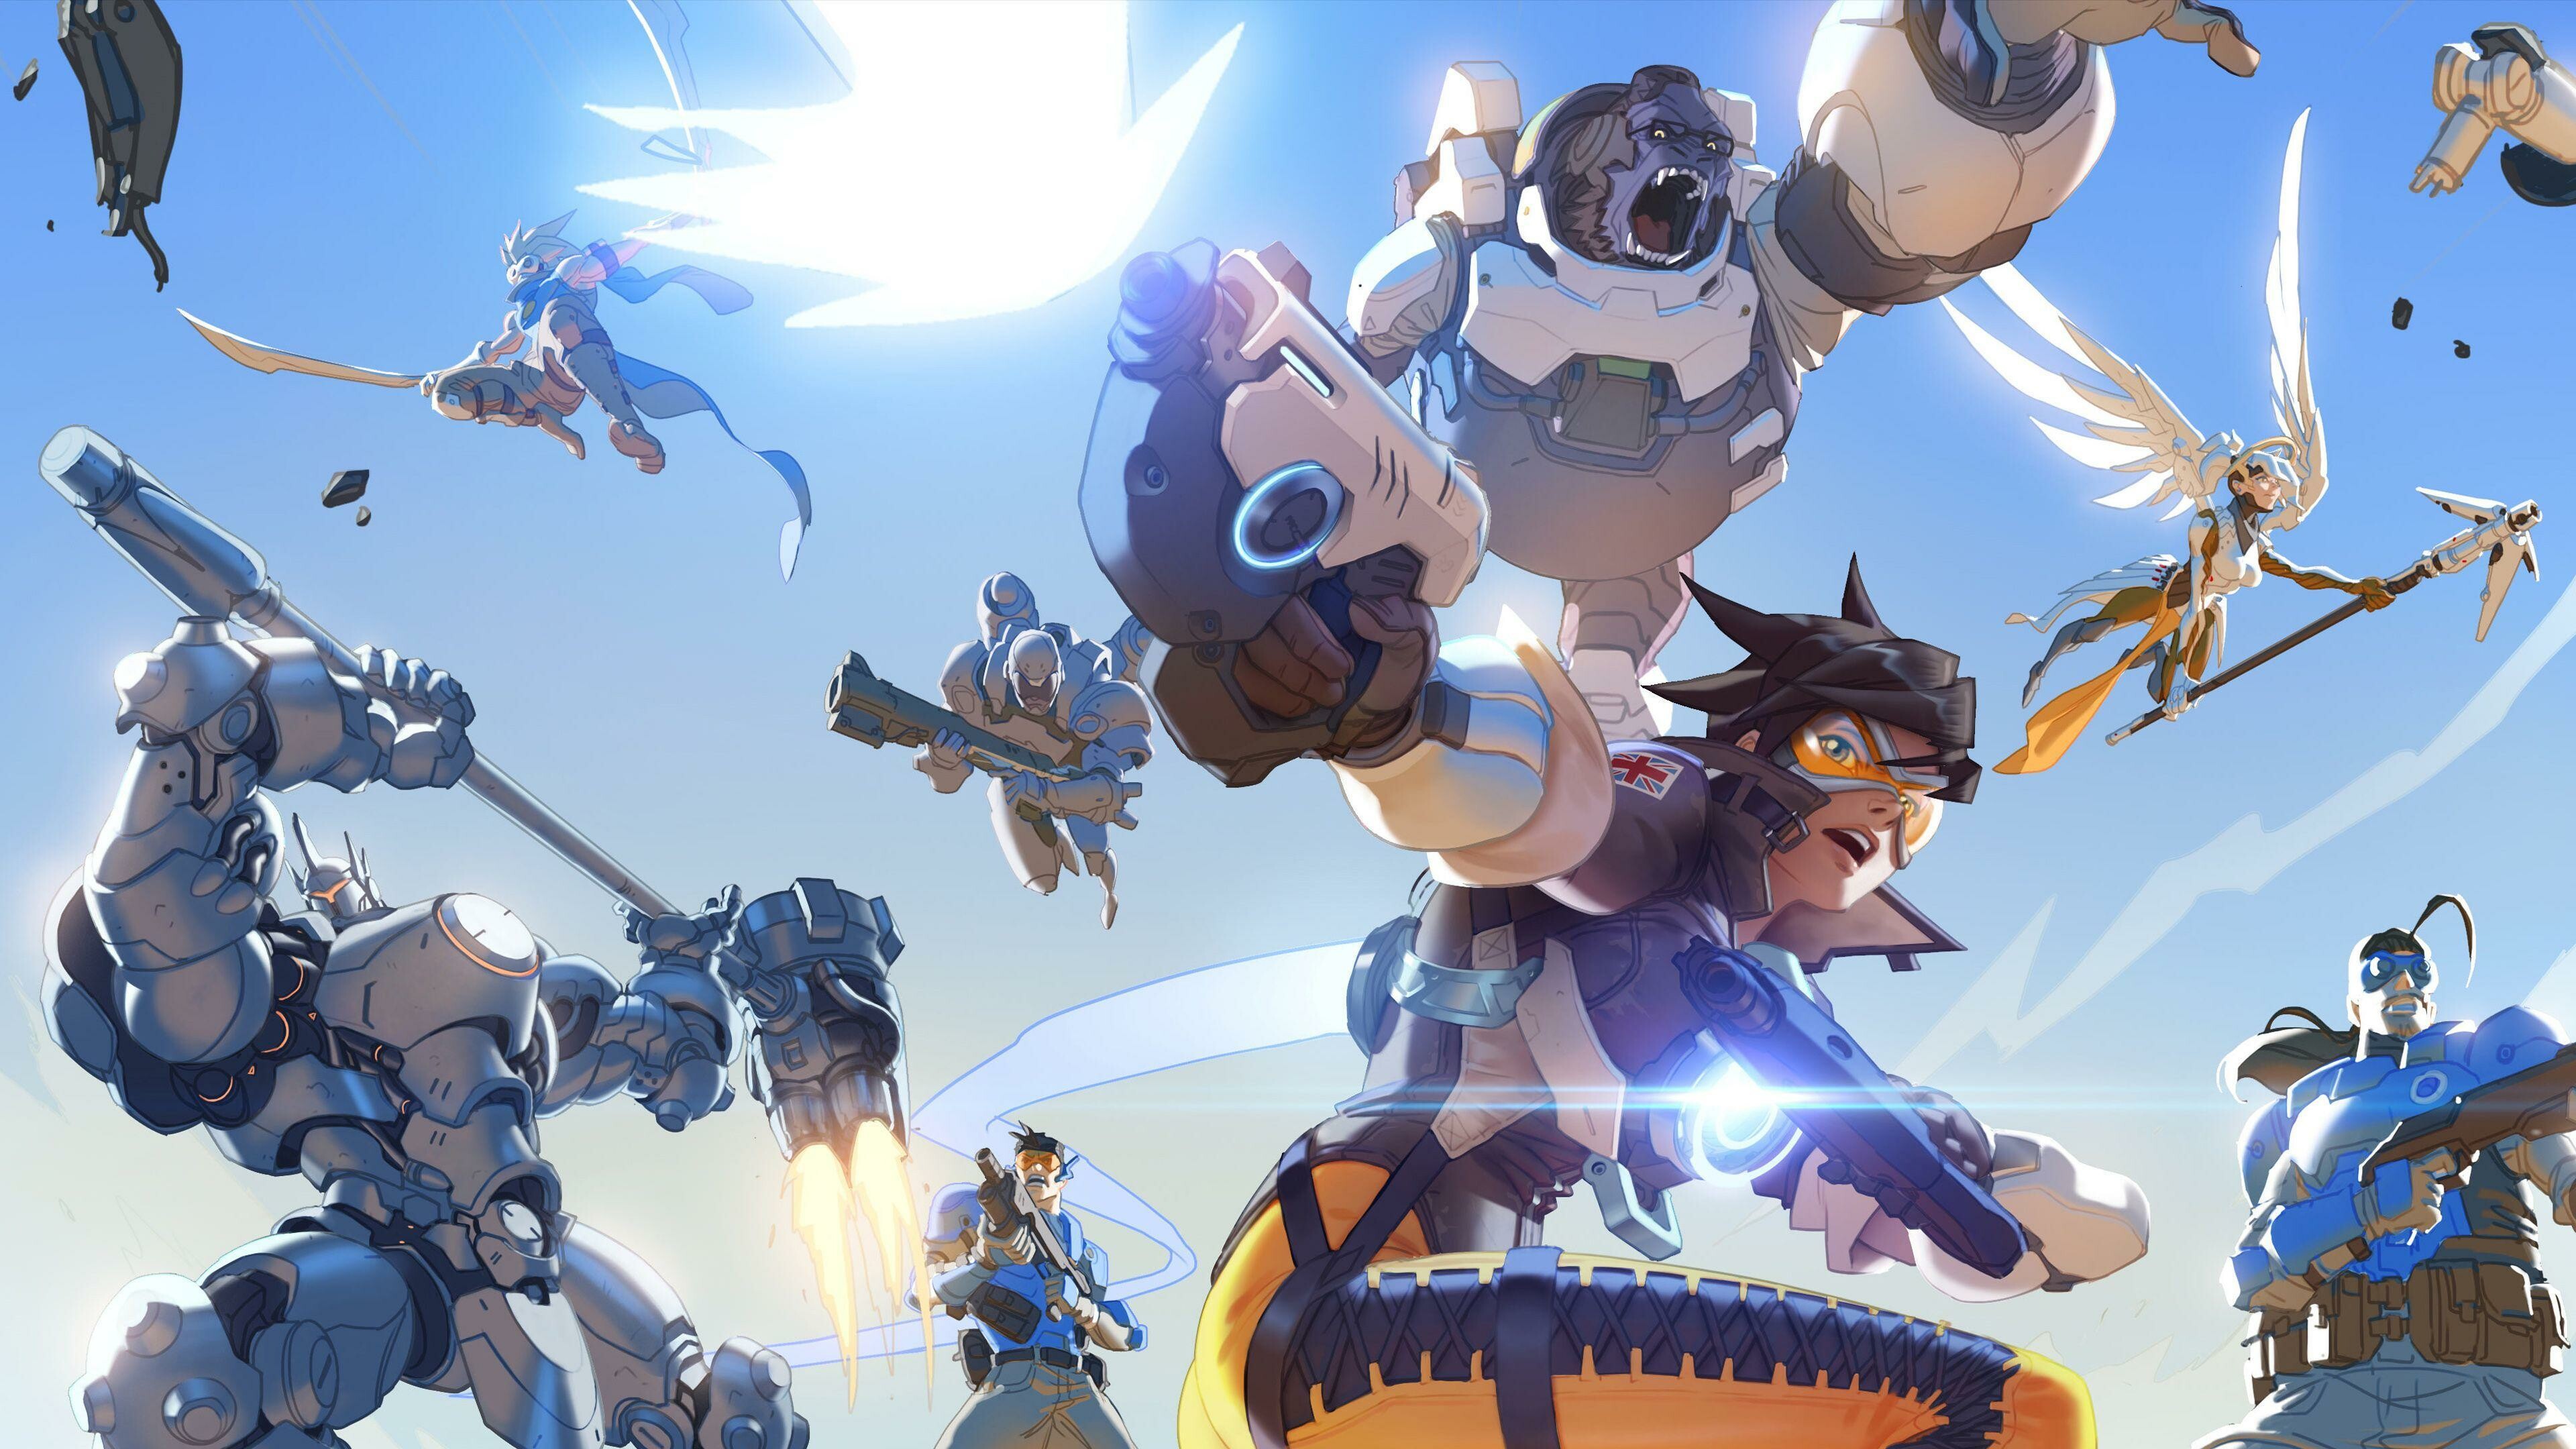 Overwatch: A series of online multiplayer first-person shooter (FPS) video games. 3840x2160 4K Background.